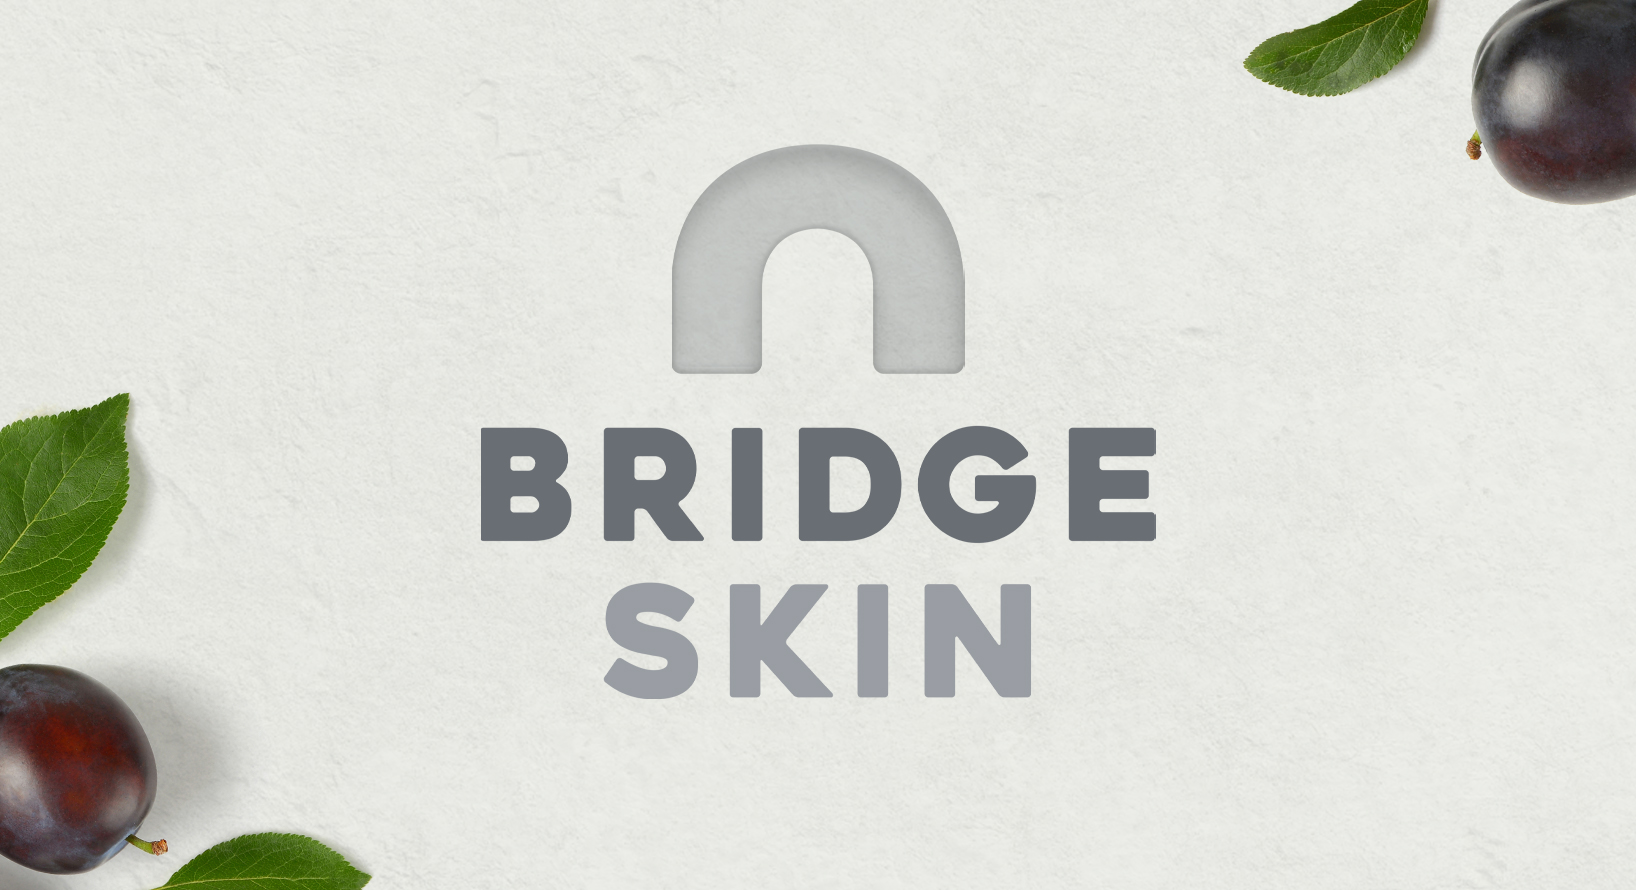 Bridge Skin master logo on a concrete background, composed with davidson plums